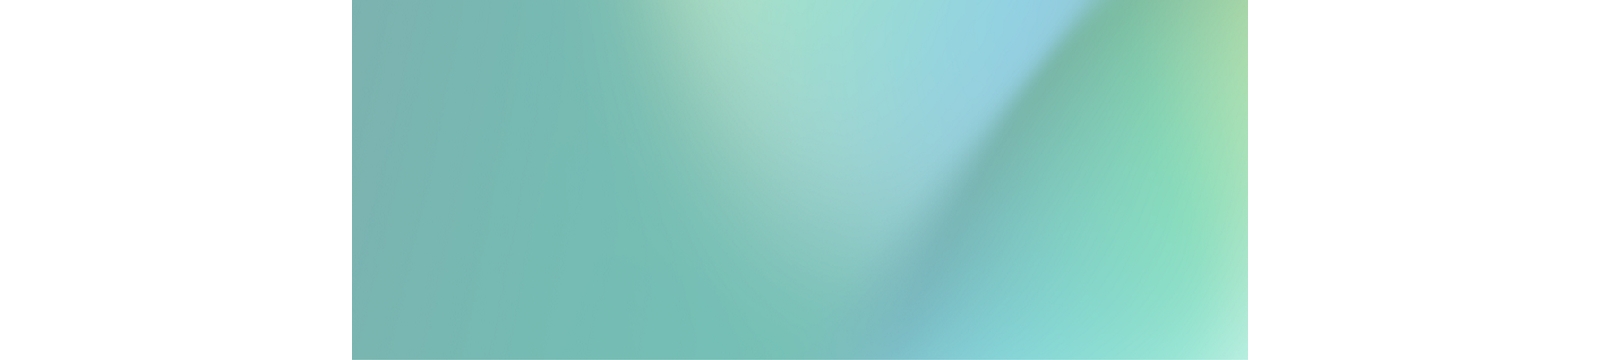 A green and blue gradient